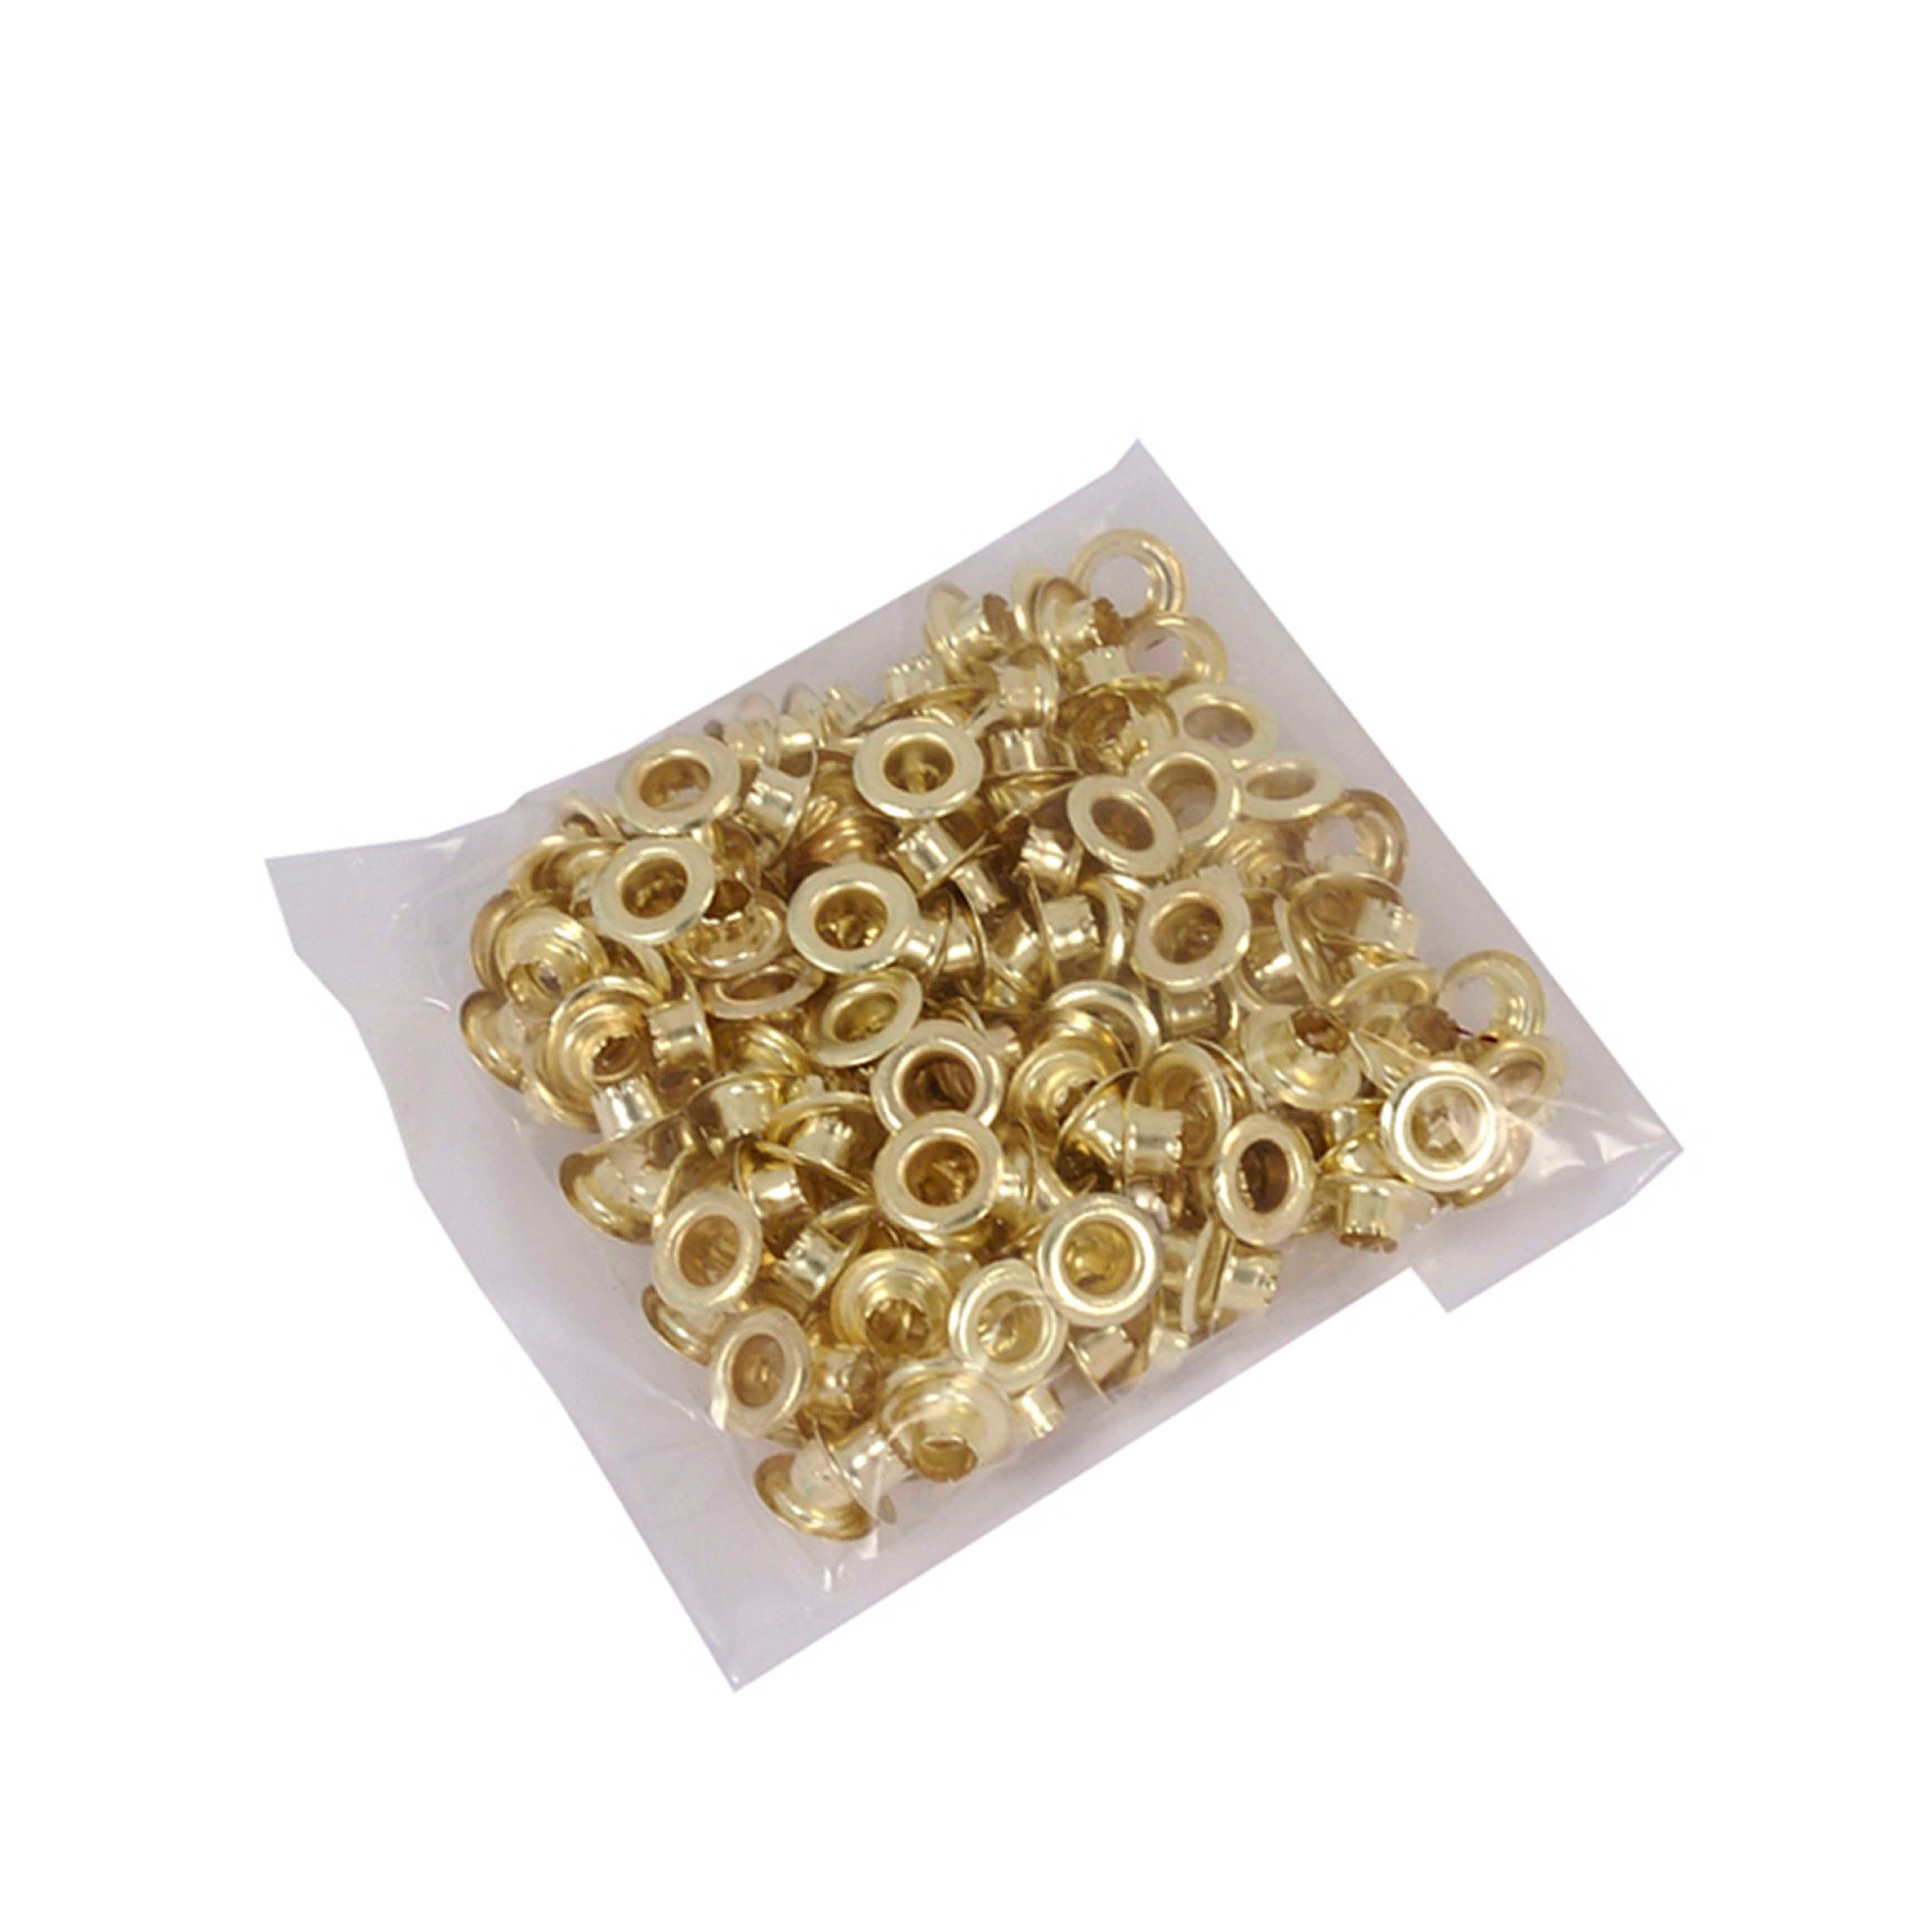 25pack 3/4 Hole Metal Grommets Eyelets With Washers for Billboard